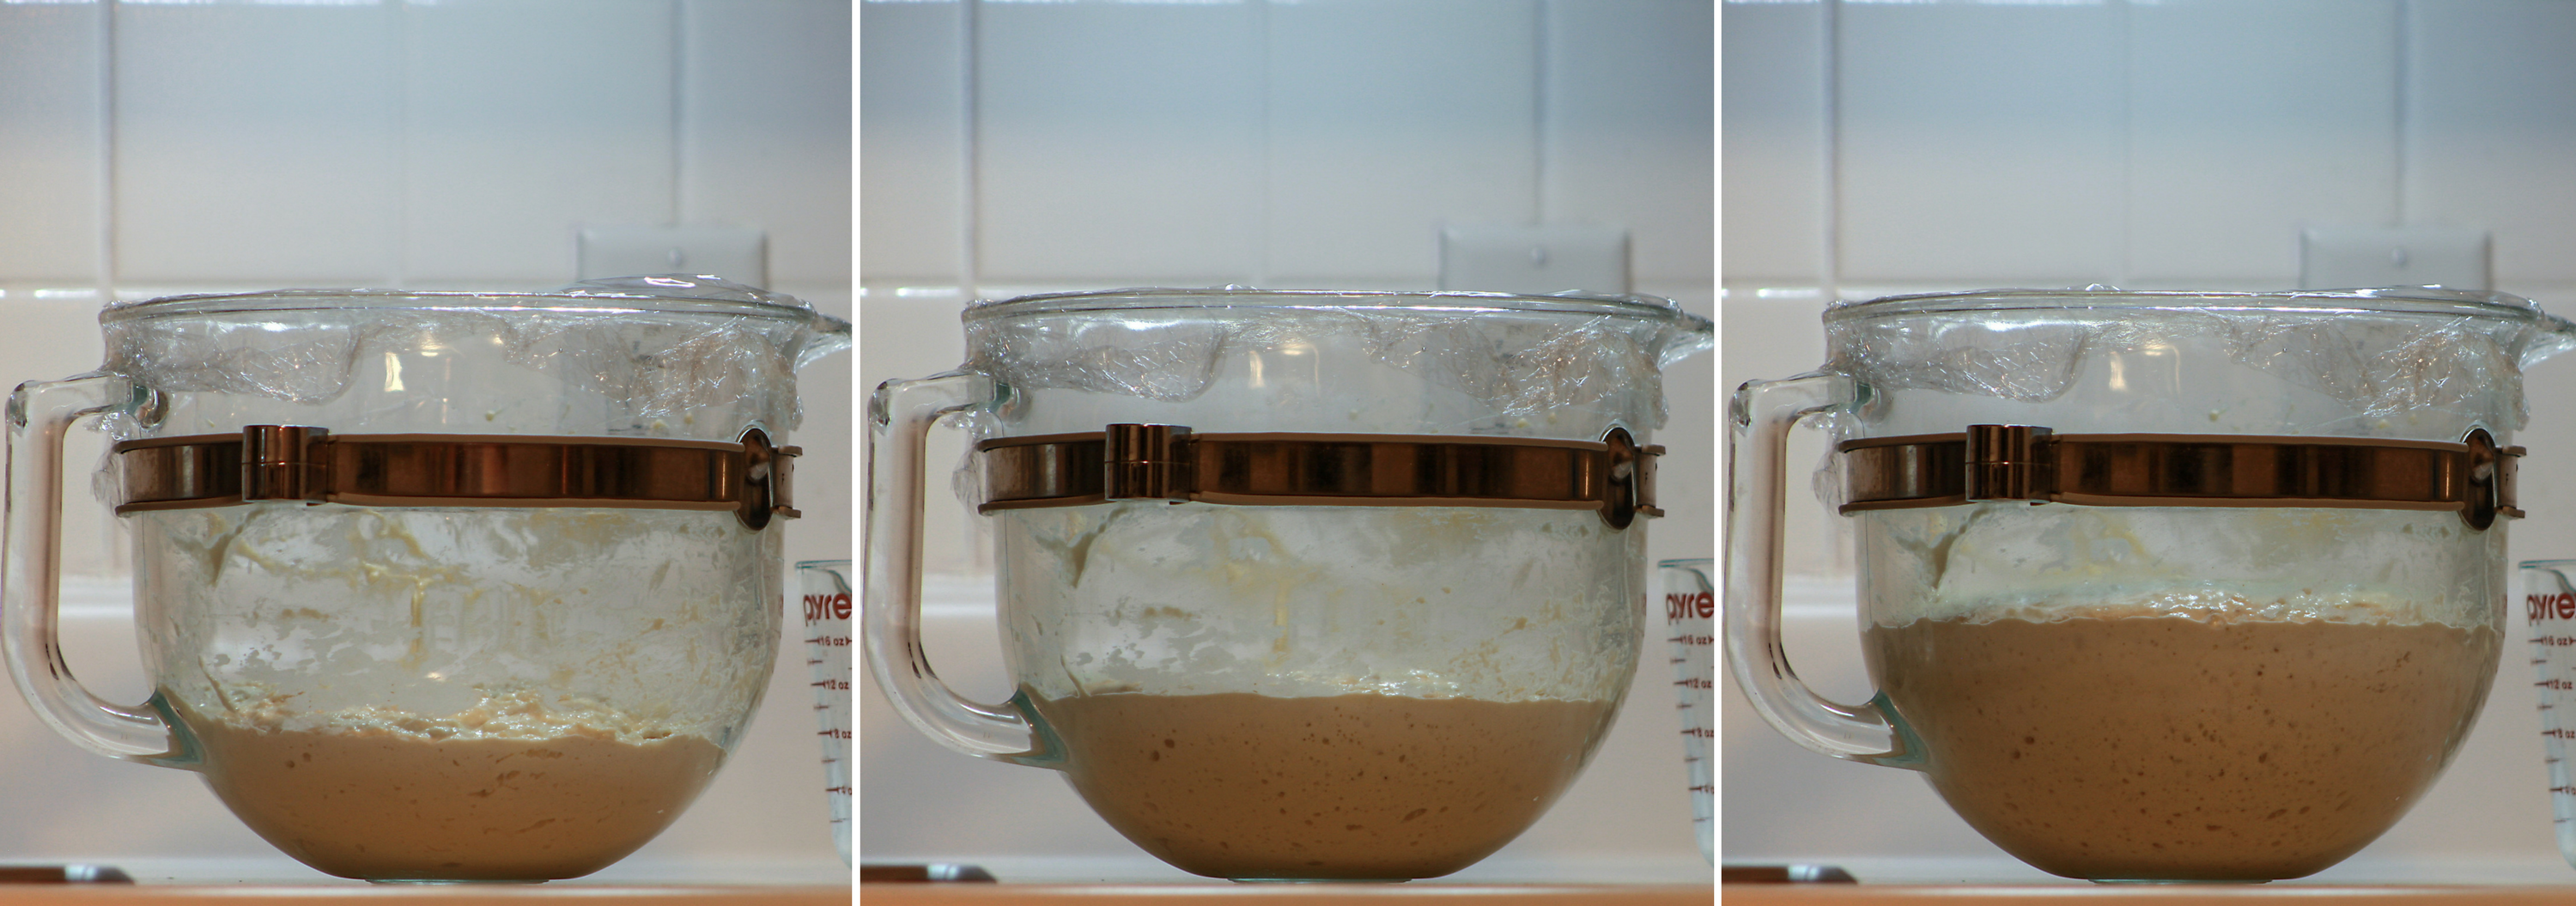 Three photos of a bagel sponge rising in a glass mixing bowl